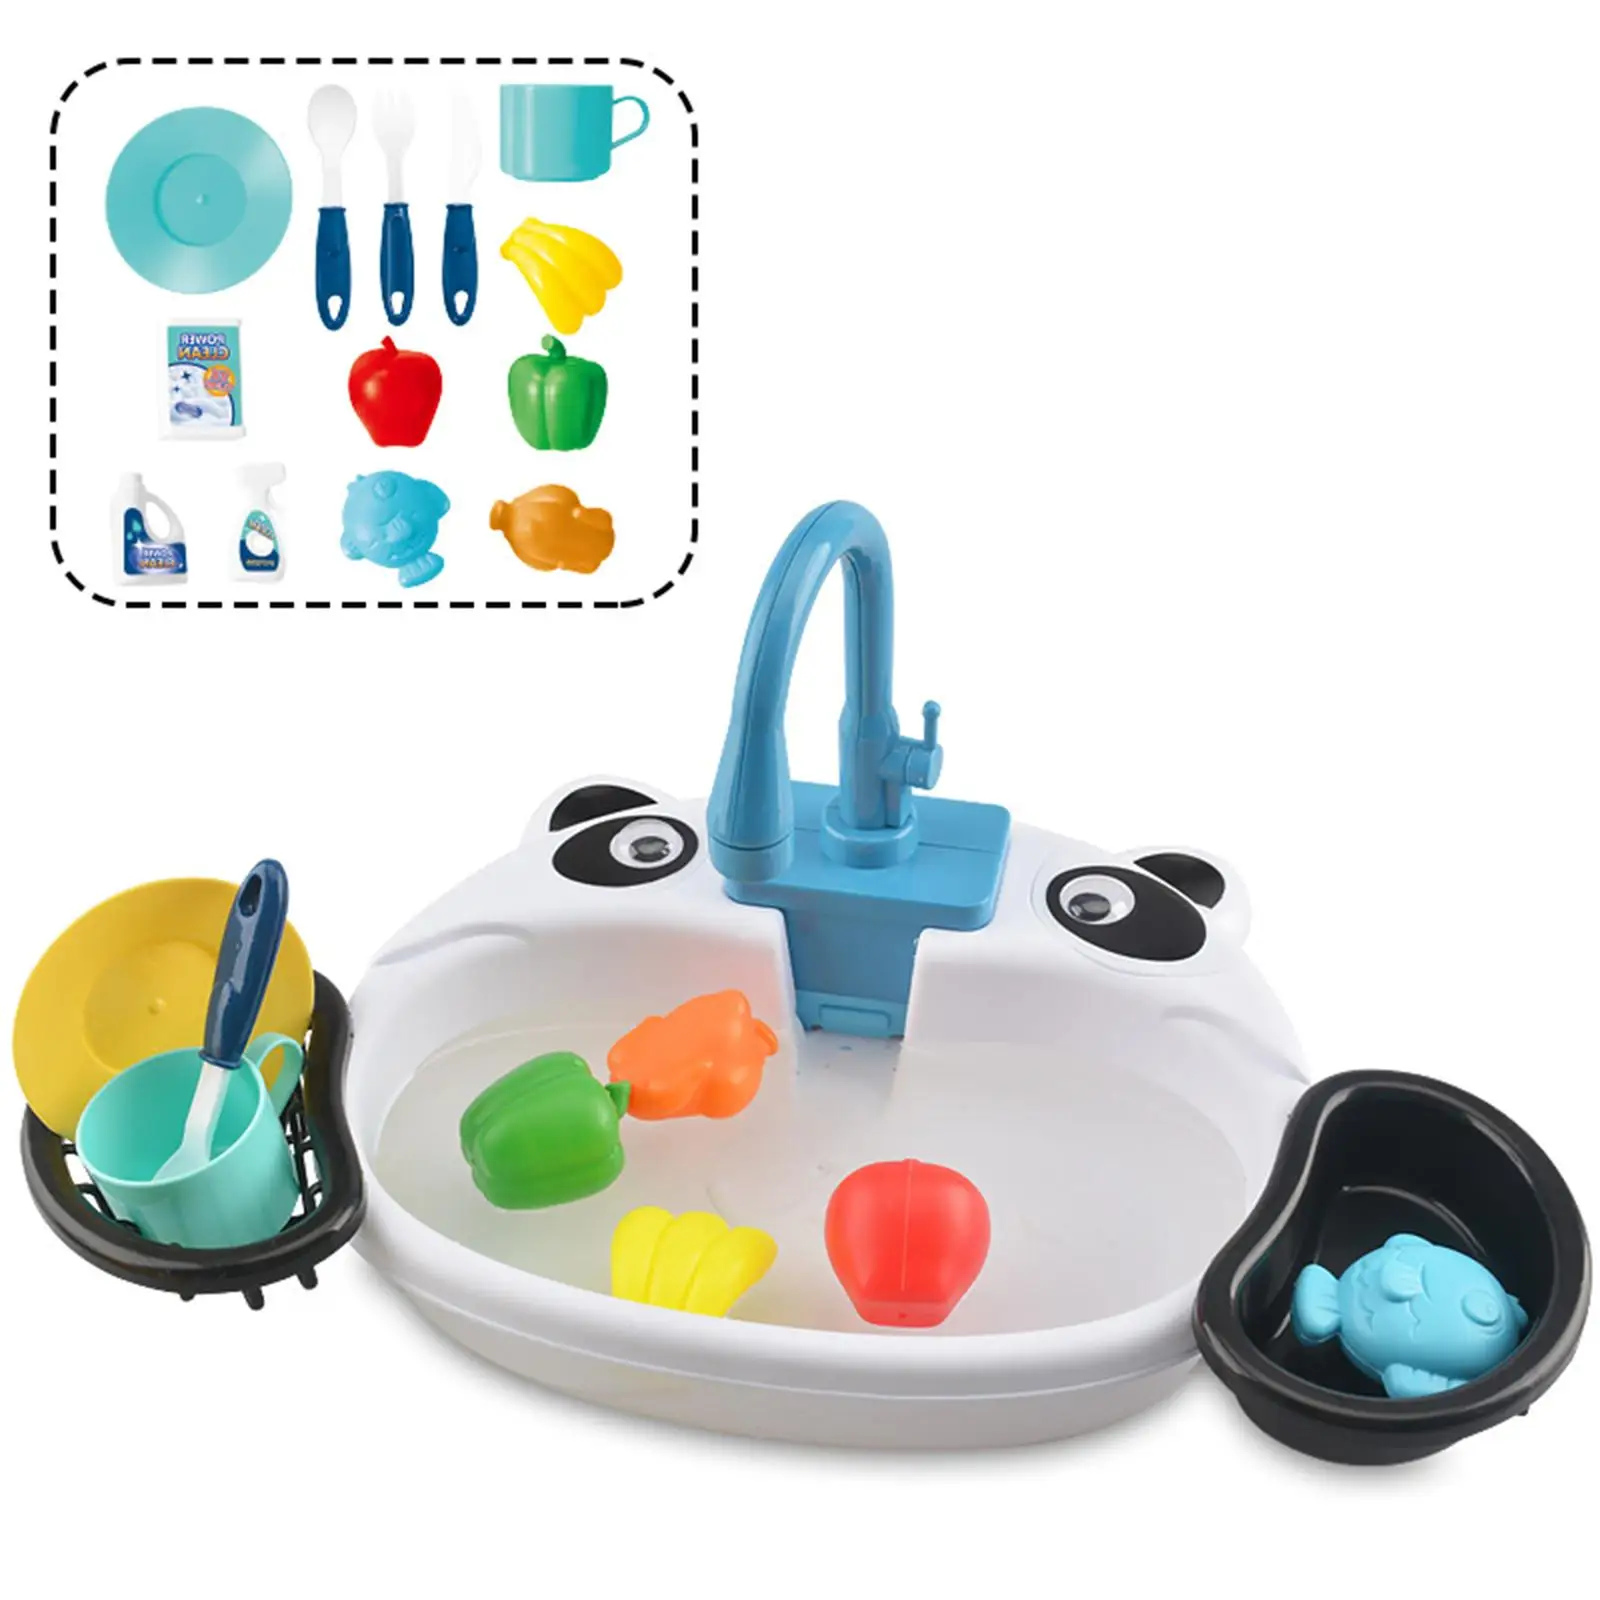 Play Sink Toys with Running Water Play Set Educational Gifts Wash up Automatic Water Cycle System Simulated for Role Play Gift